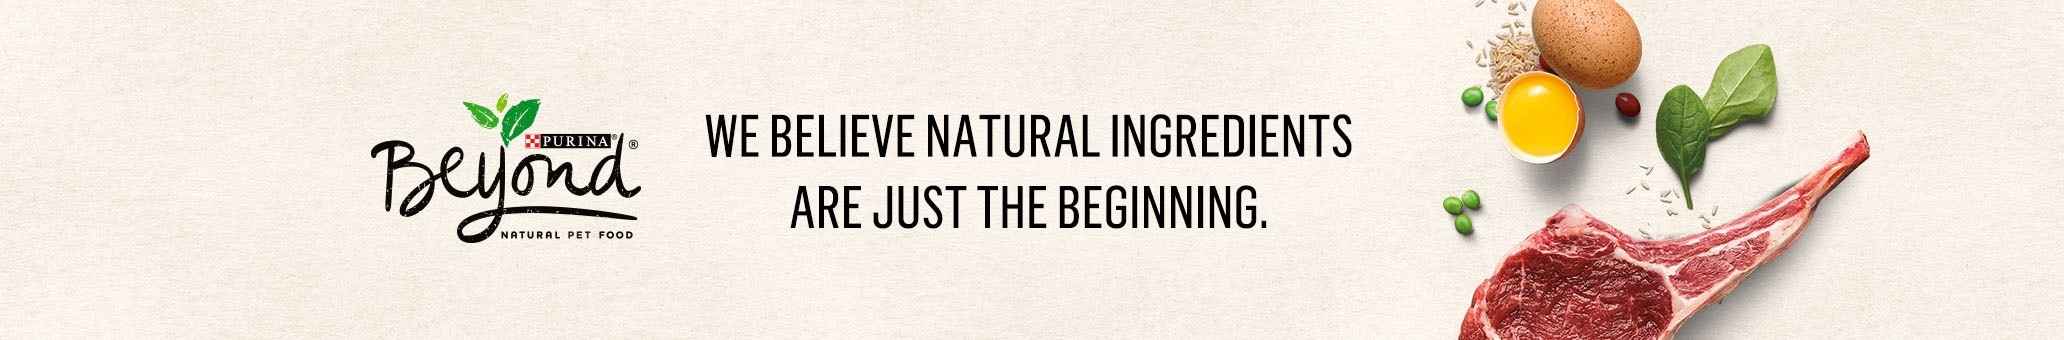 Purina Beyond - We believe natural ingredients are just the beginning.